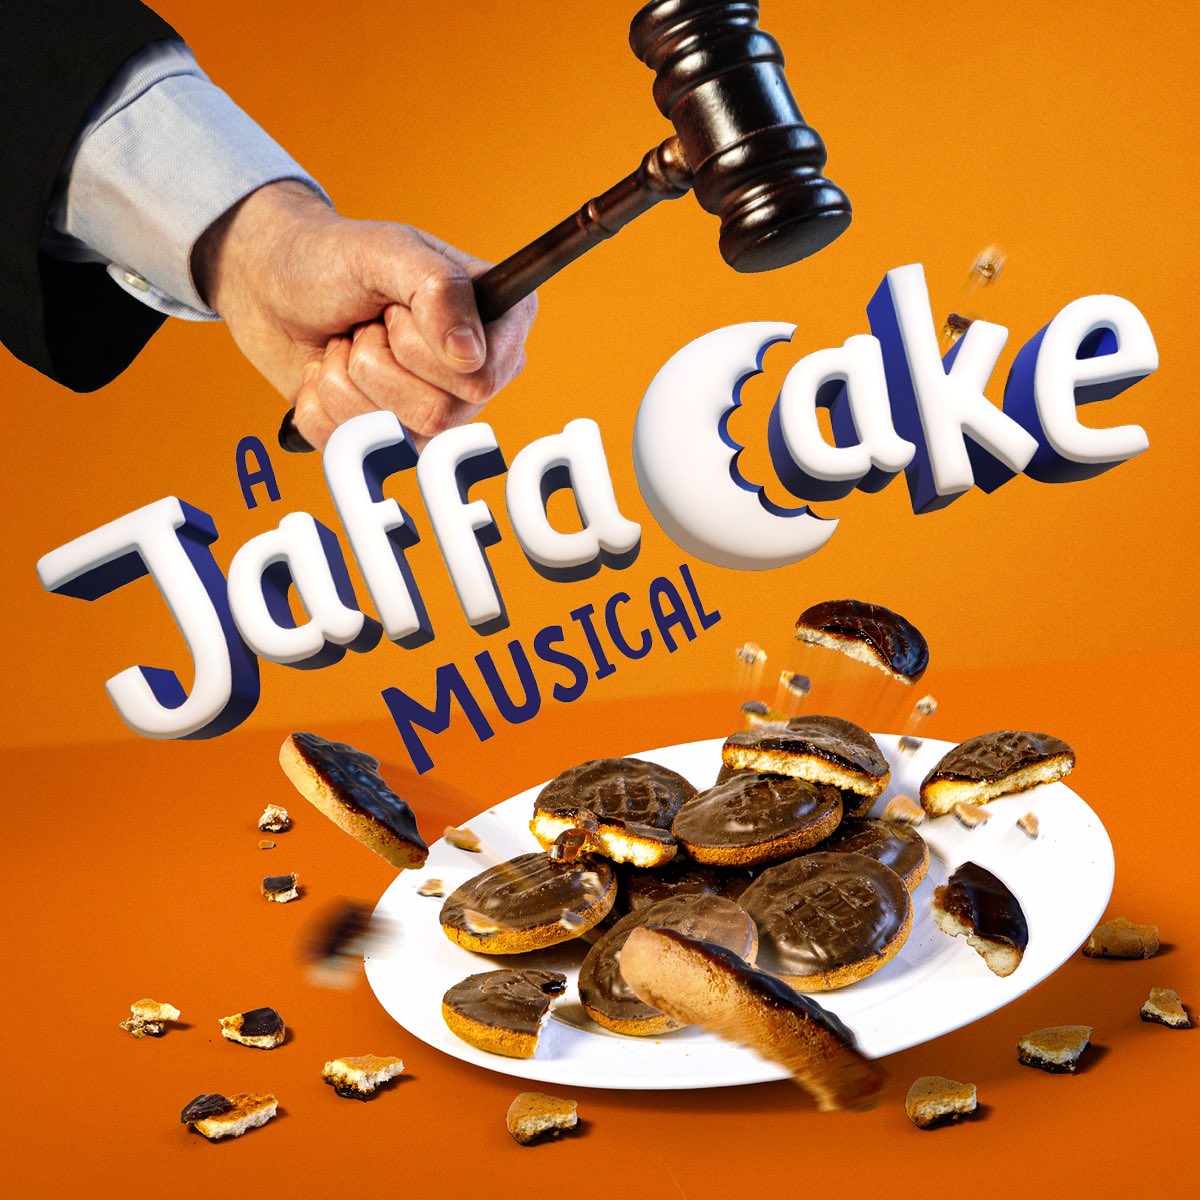 Hope you’re all having a chocolatey weekend, Gigglemugs! 🙌 Speaking of which, A Jaffa Cake Musical opens @edfringe 4 MONTHS TODAY! 🎉 And tickets are already flying 🤯 So snap up yours from @ThePleasance website NOW! 👉 pleasance.co.uk/event/jaffa-ca…